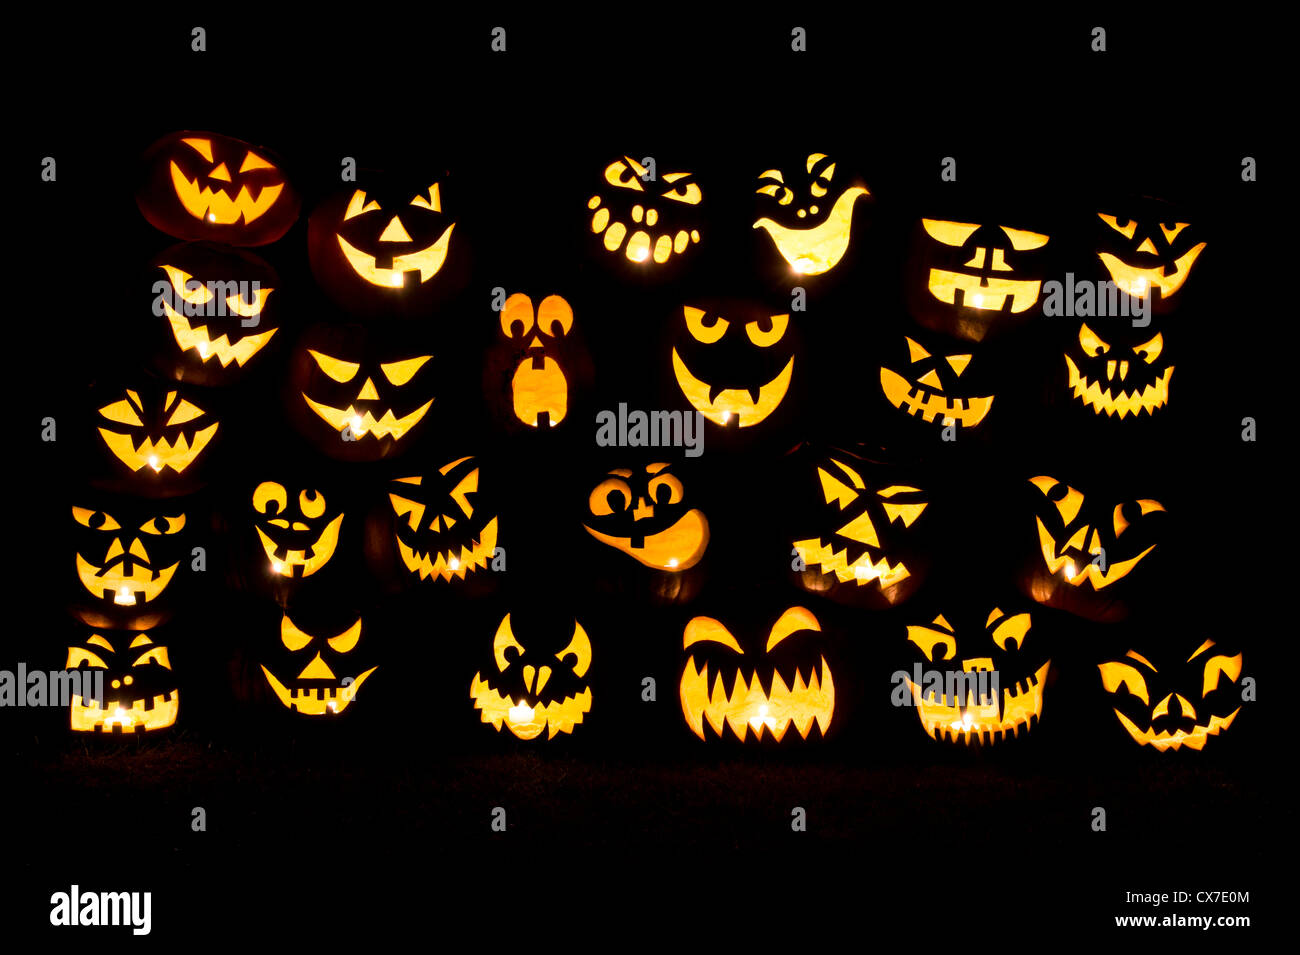 Halloween Pumpkins Jack O Lantern Faces At Night Stock Photo Alamy,Types Of Birch Trees In Wisconsin